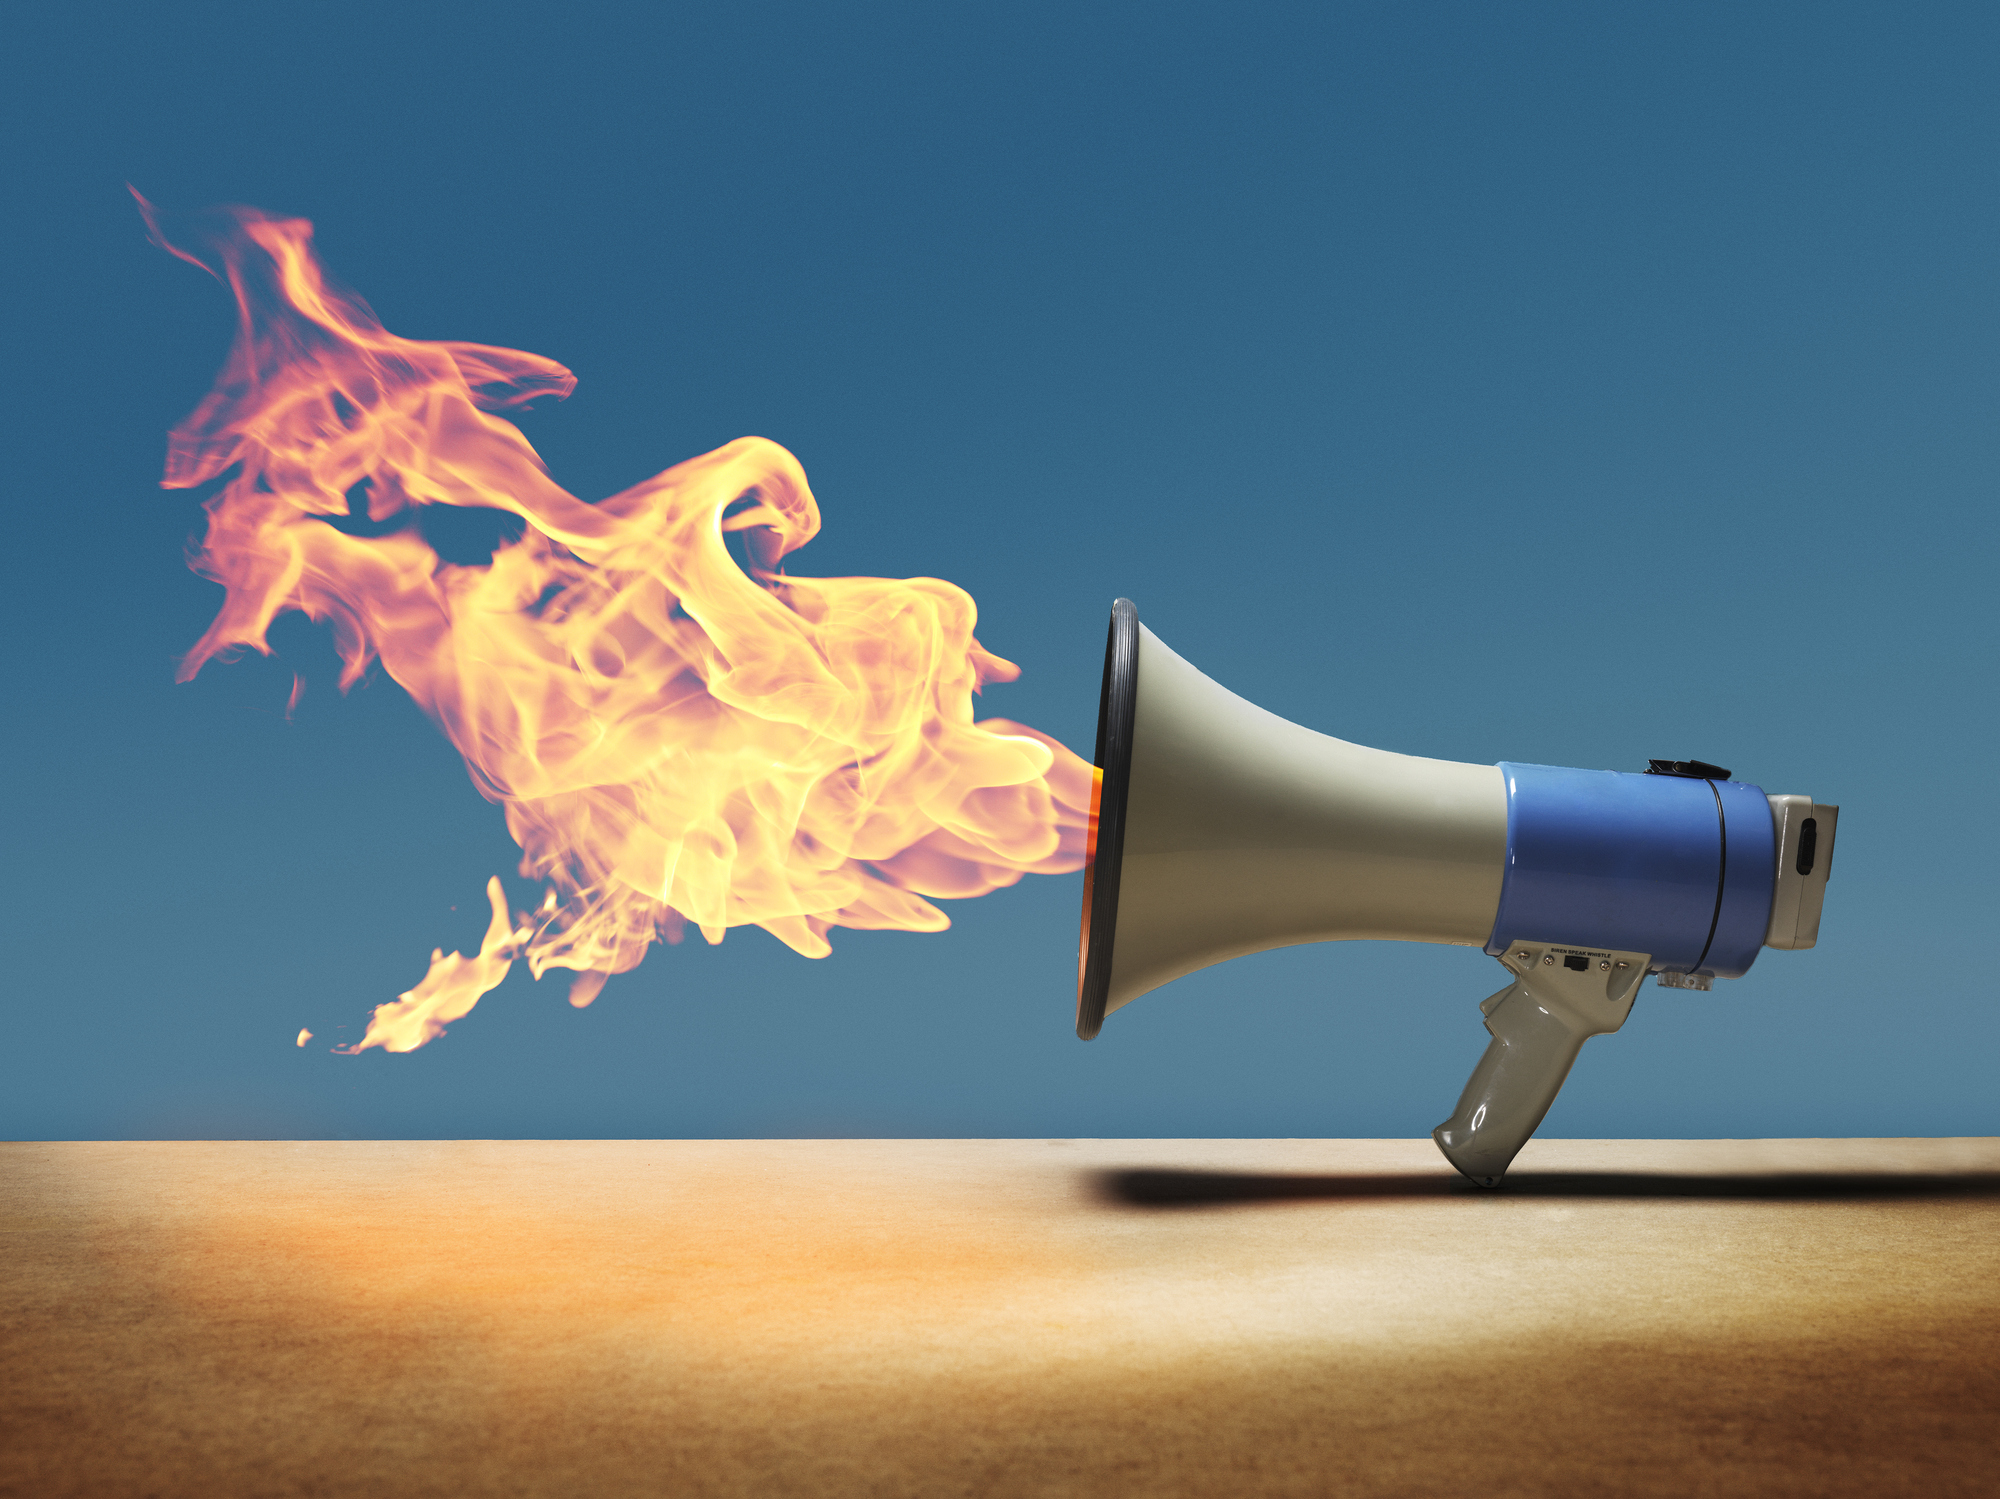 Fire out of megaphone